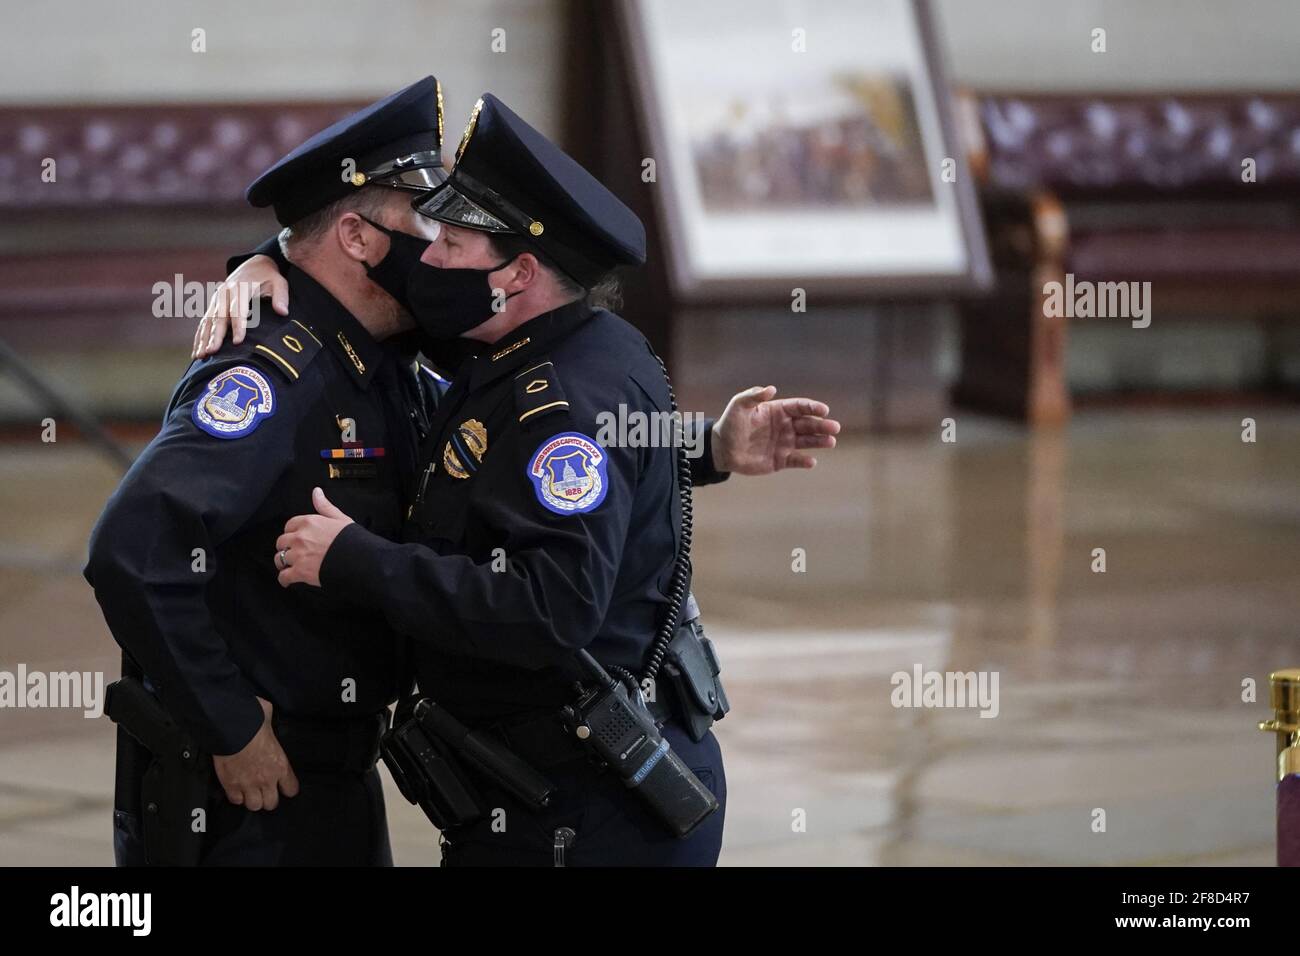 Capitol Police officers embrace after paying their respects at the casket of the late U.S. Capitol Police officer William 'Billy' Evans during a memorial service as Evans lies in honor in the Rotunda at the U.S. Capitol in Washington DC, on Tuesday April 13, 2021. Evans was killed in the line of duty during the attack outside the U.S. Capitol on April 2. Pool photo by Drew Angerer/UPI Credit: UPI/Alamy Live News Stock Photo